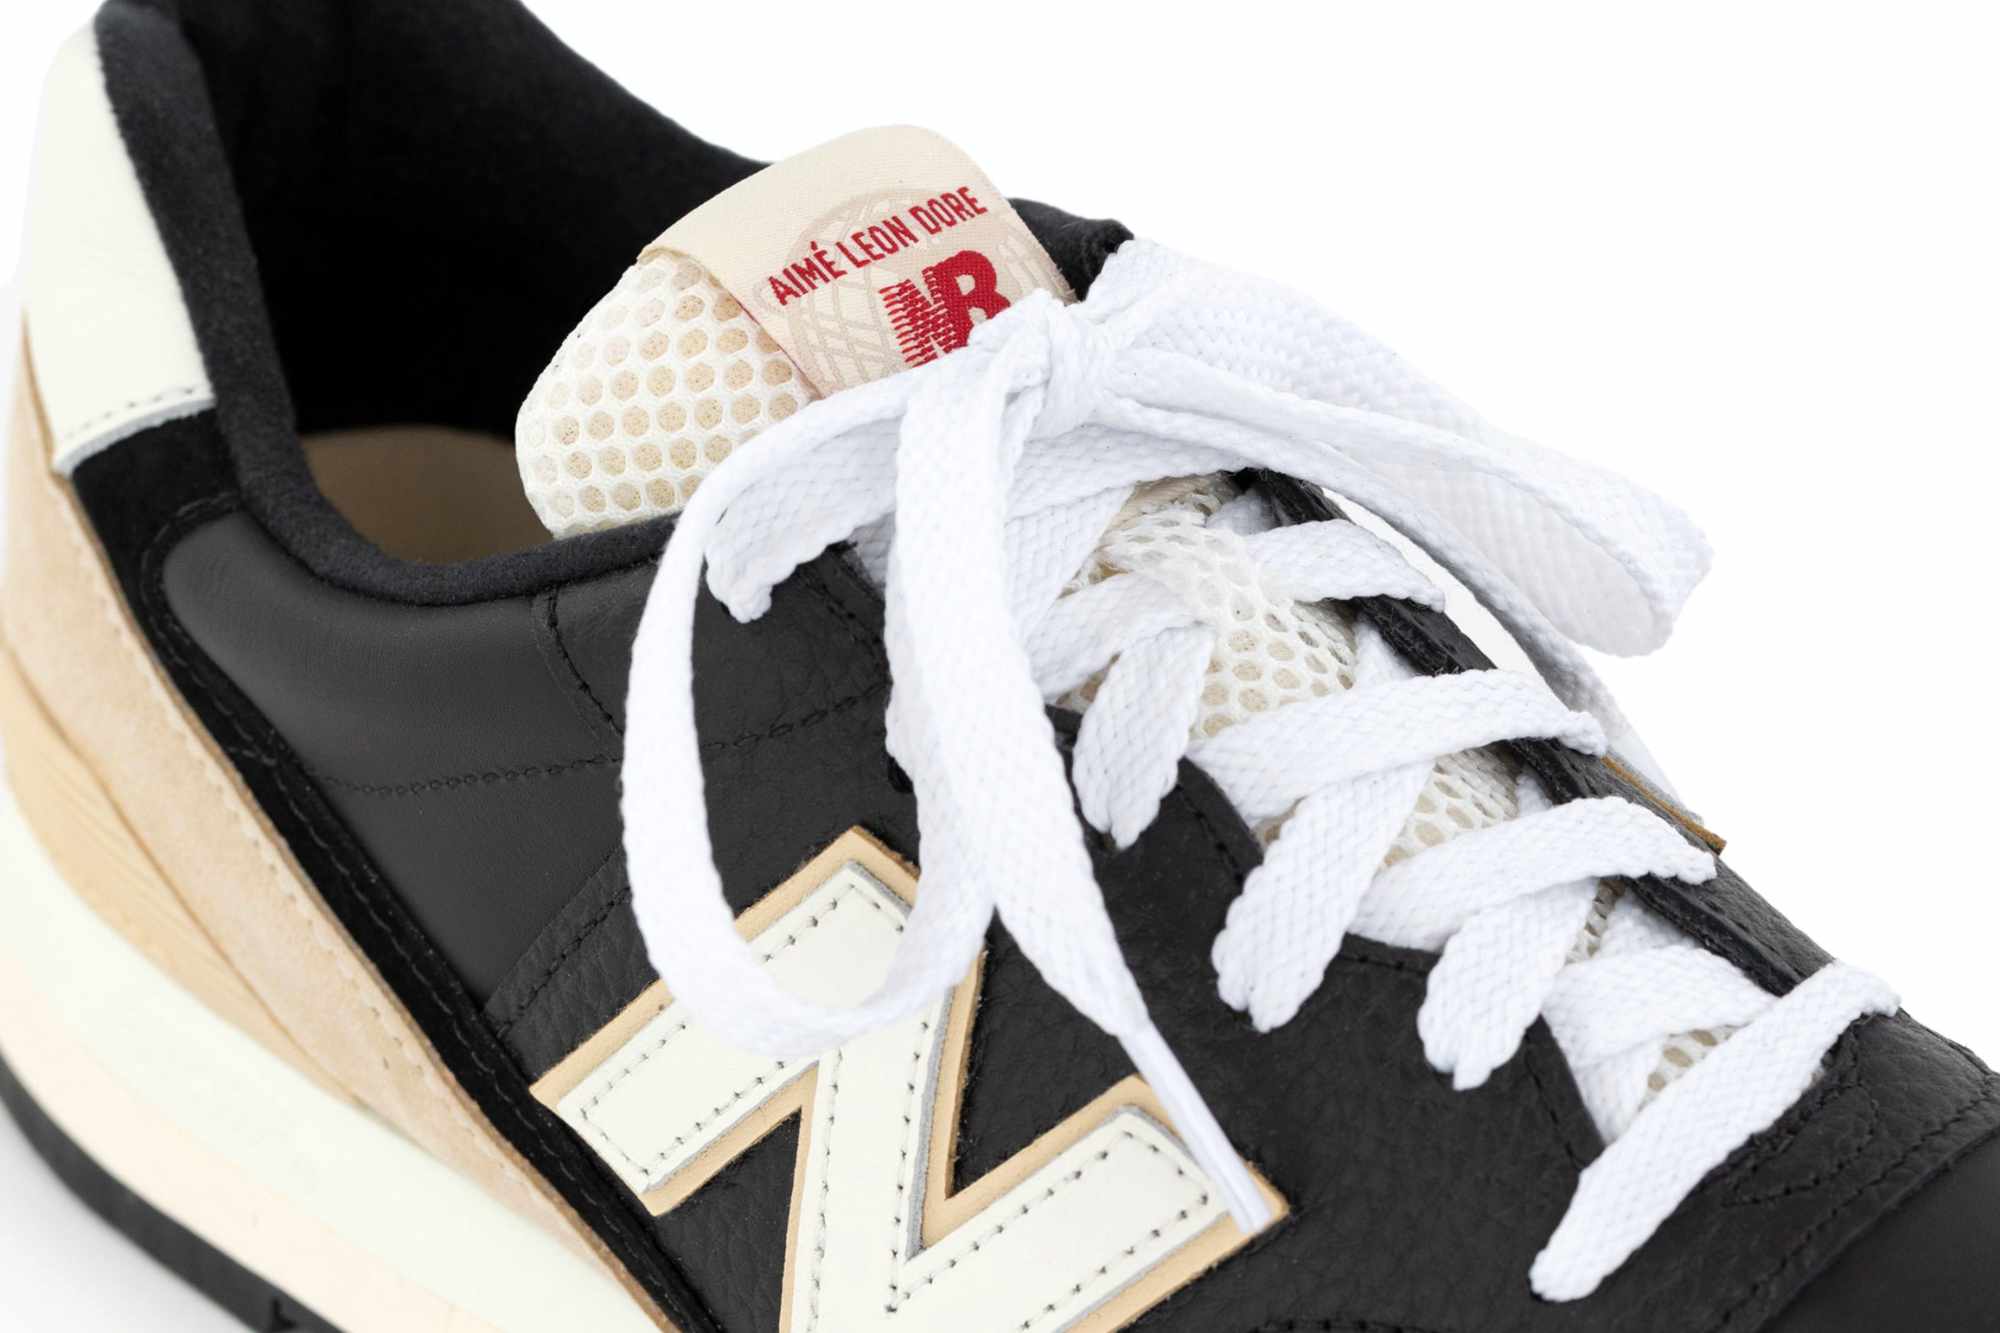 A detailed top-down photo of Aimé Leon Dore and New Balance's 996 sneaker collab in black and white leather